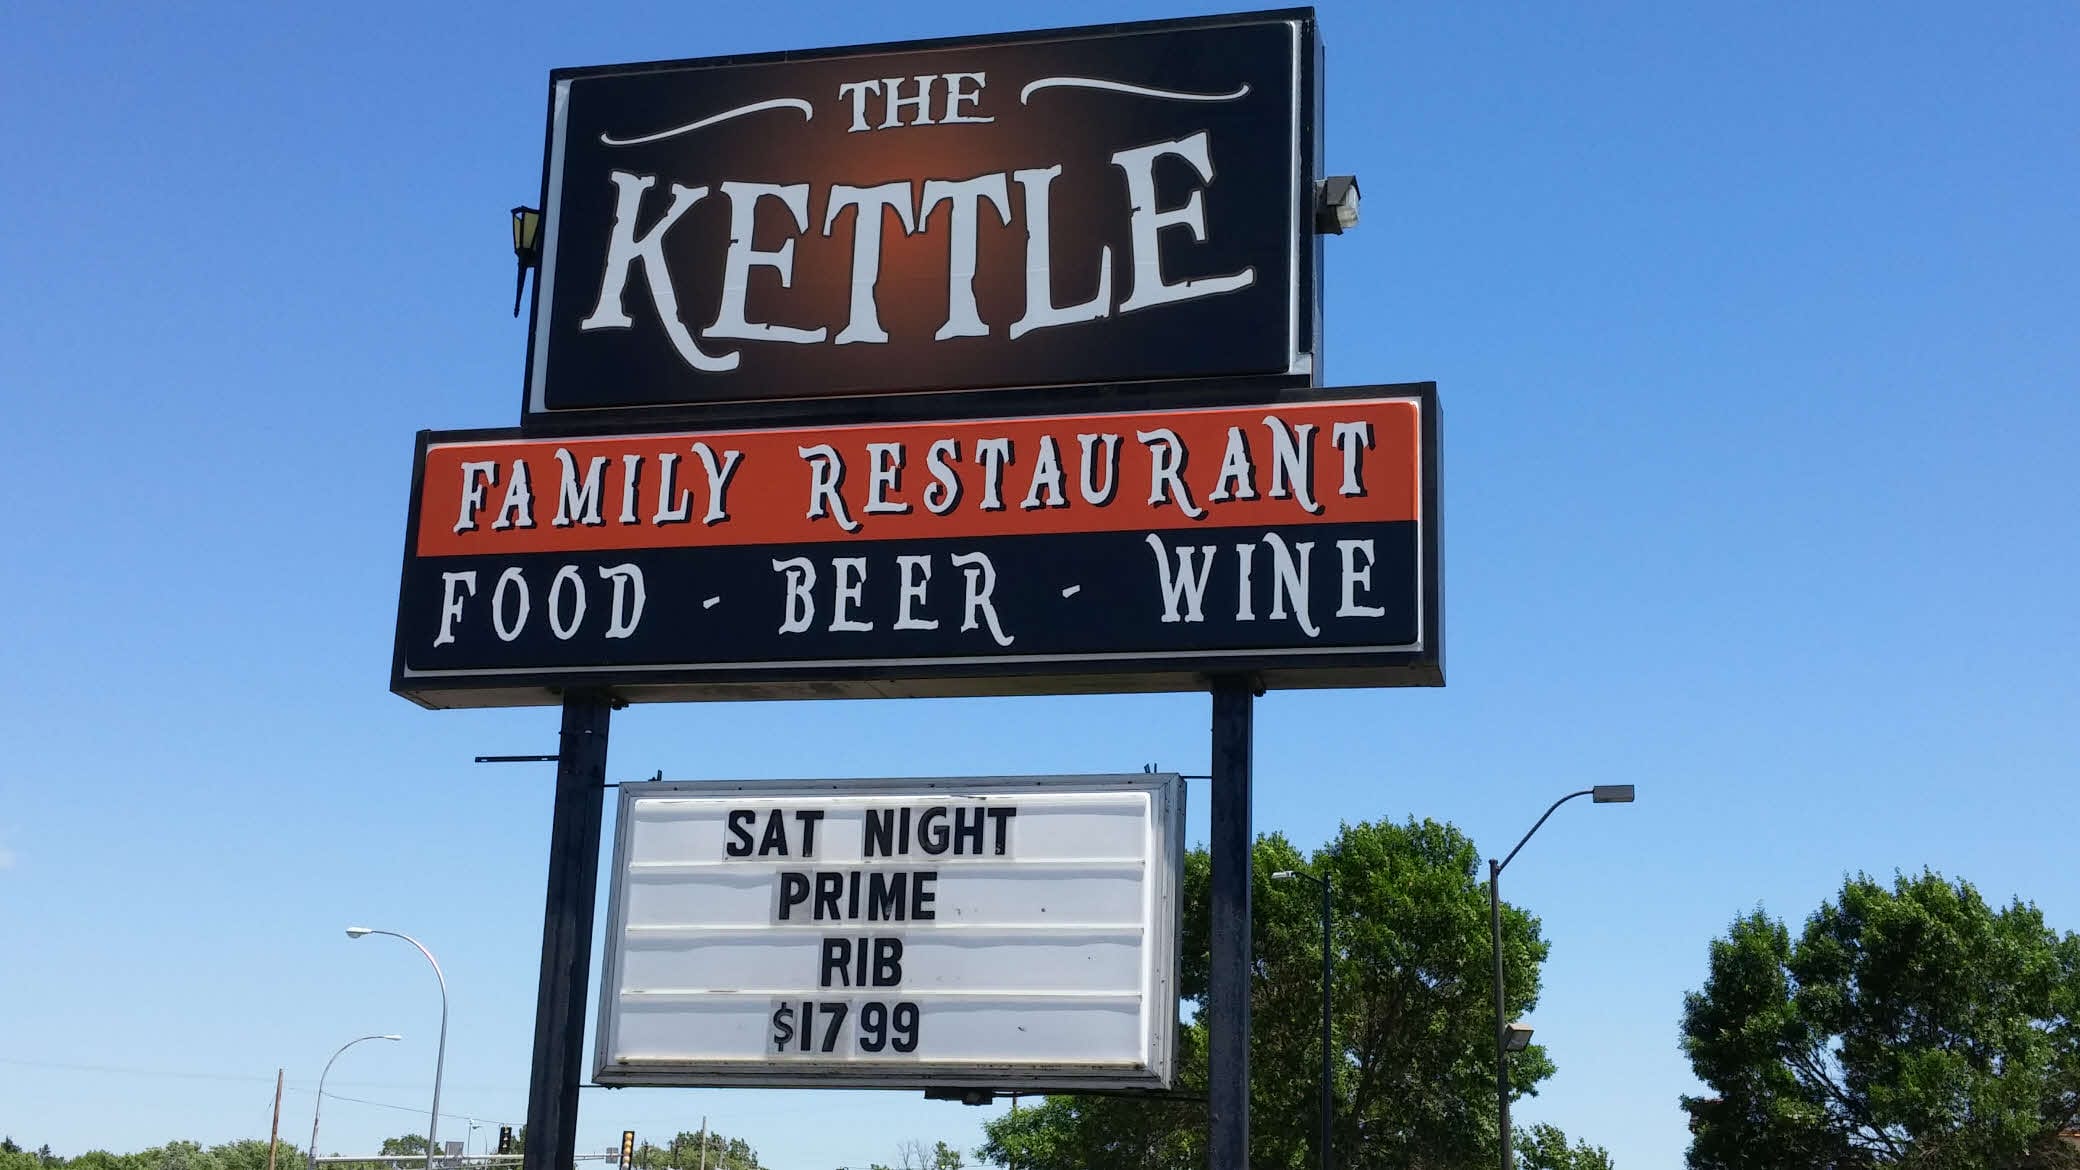 Large sign for The Kettle Family Restaurant in Clearwater Minnesota